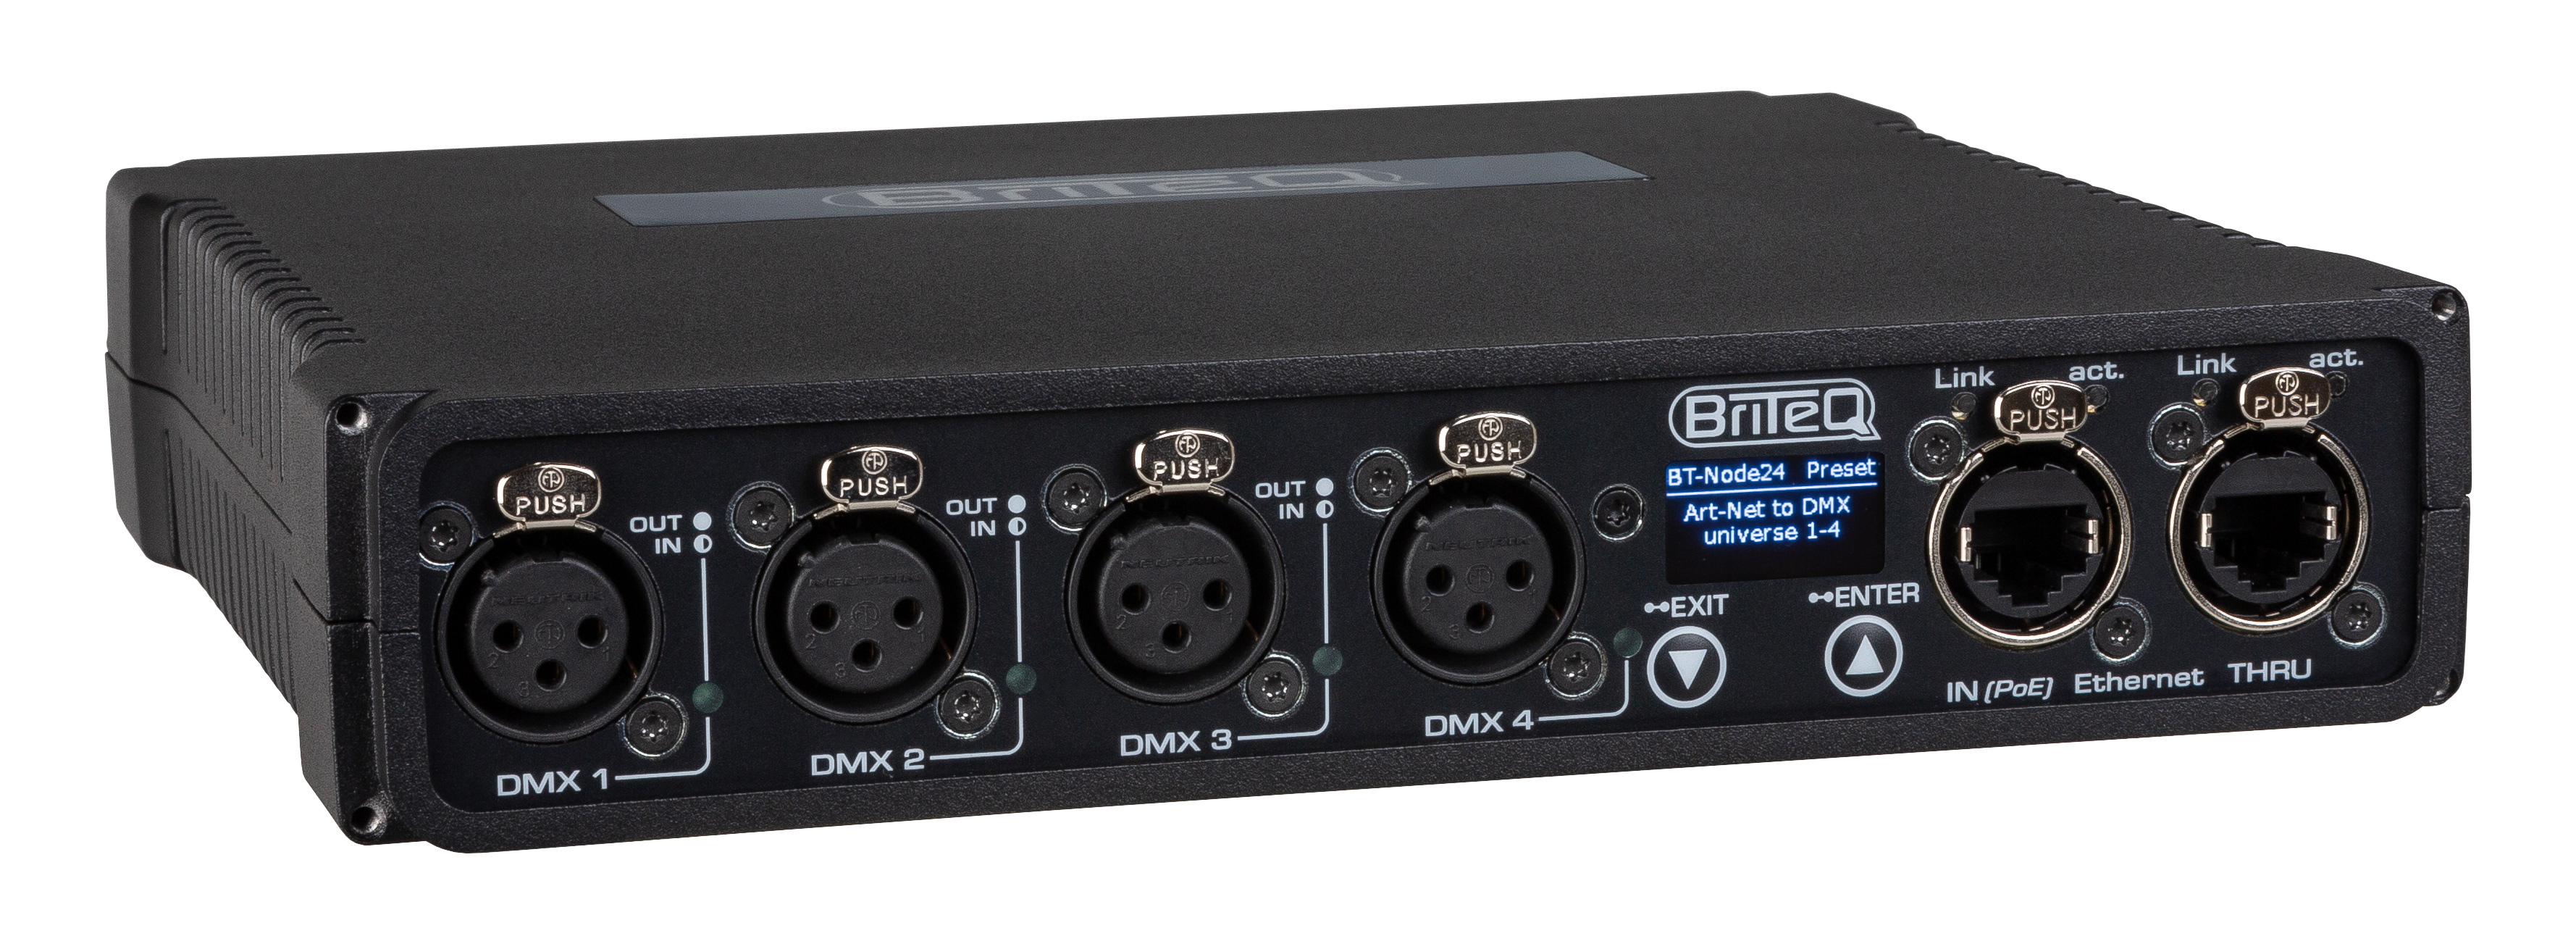 High-speed ArtNet & sACN Node with 4 configurable DMX ports (XLR 3-pin), web interface and OLED display.  Compatible with DHCP, RDM and Gigabit Ethernet with PoE